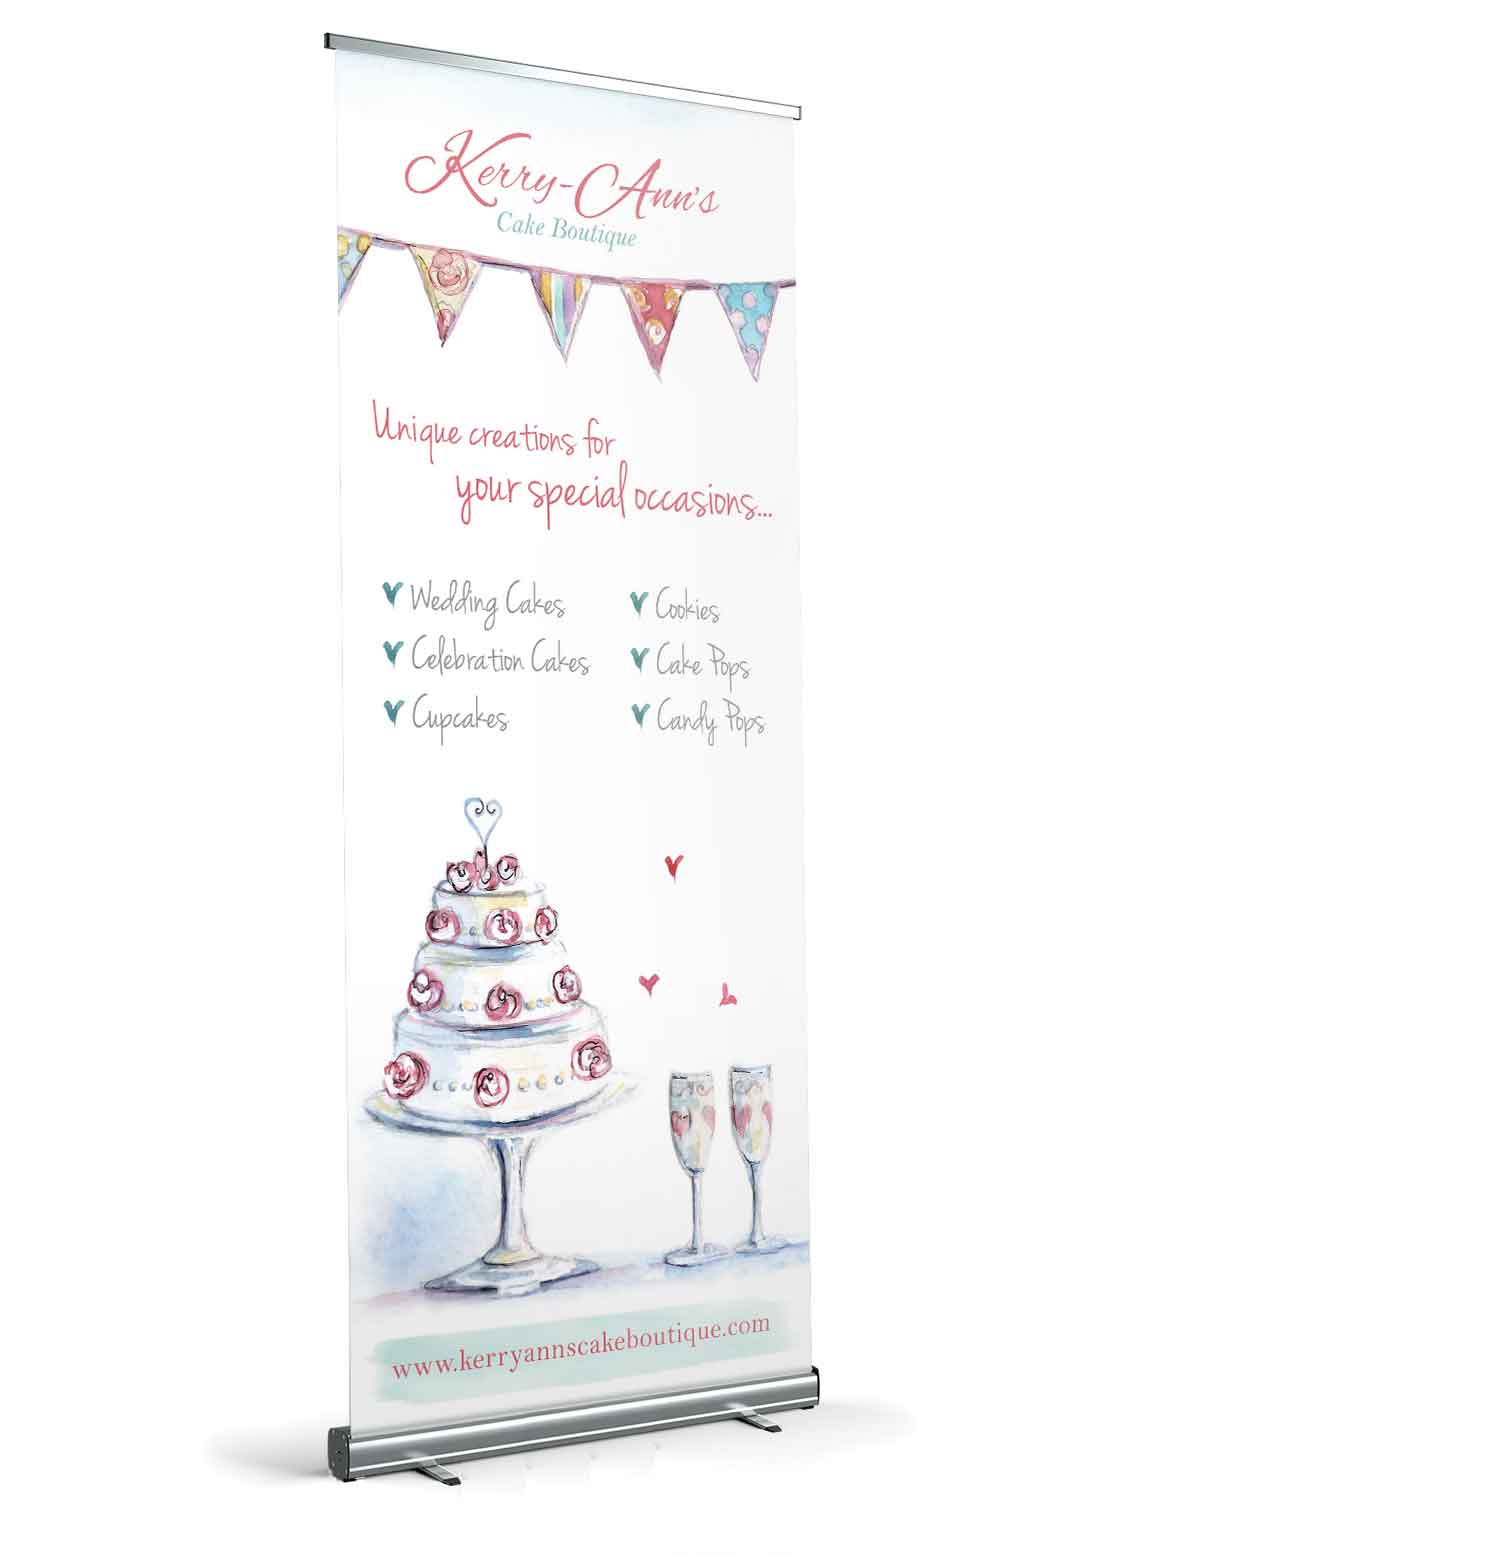 Kerry-Ann's Cake Boutique roller banner